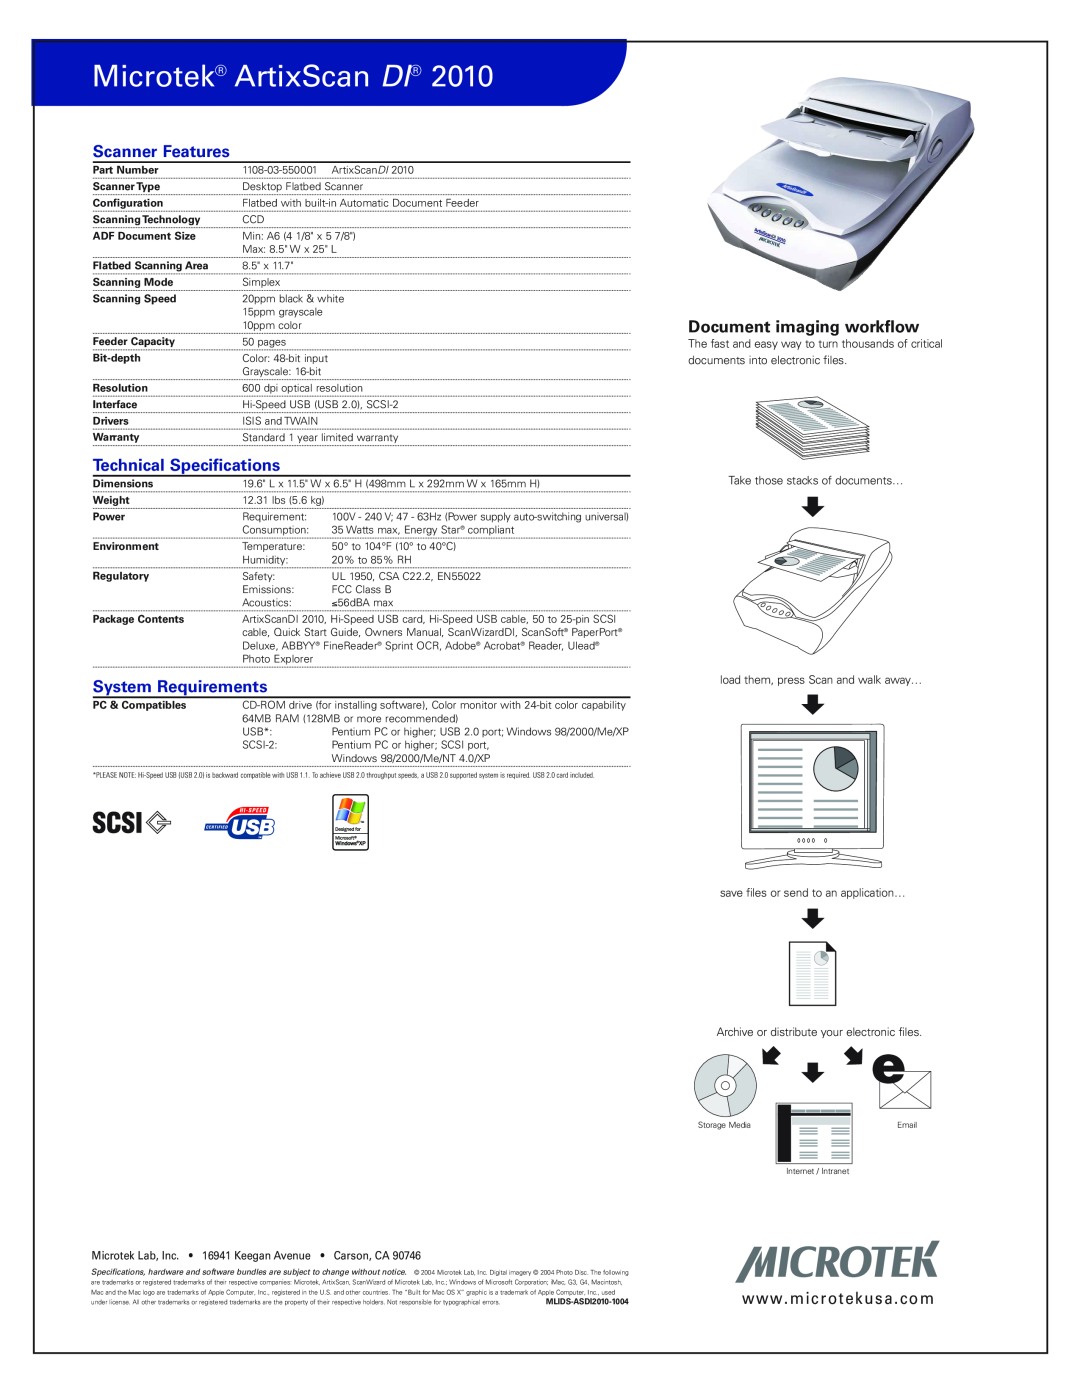 Microtek 2010 manual Scanner Features, Technical Specifications, System Requirements, Microtek ArtixScan DI 